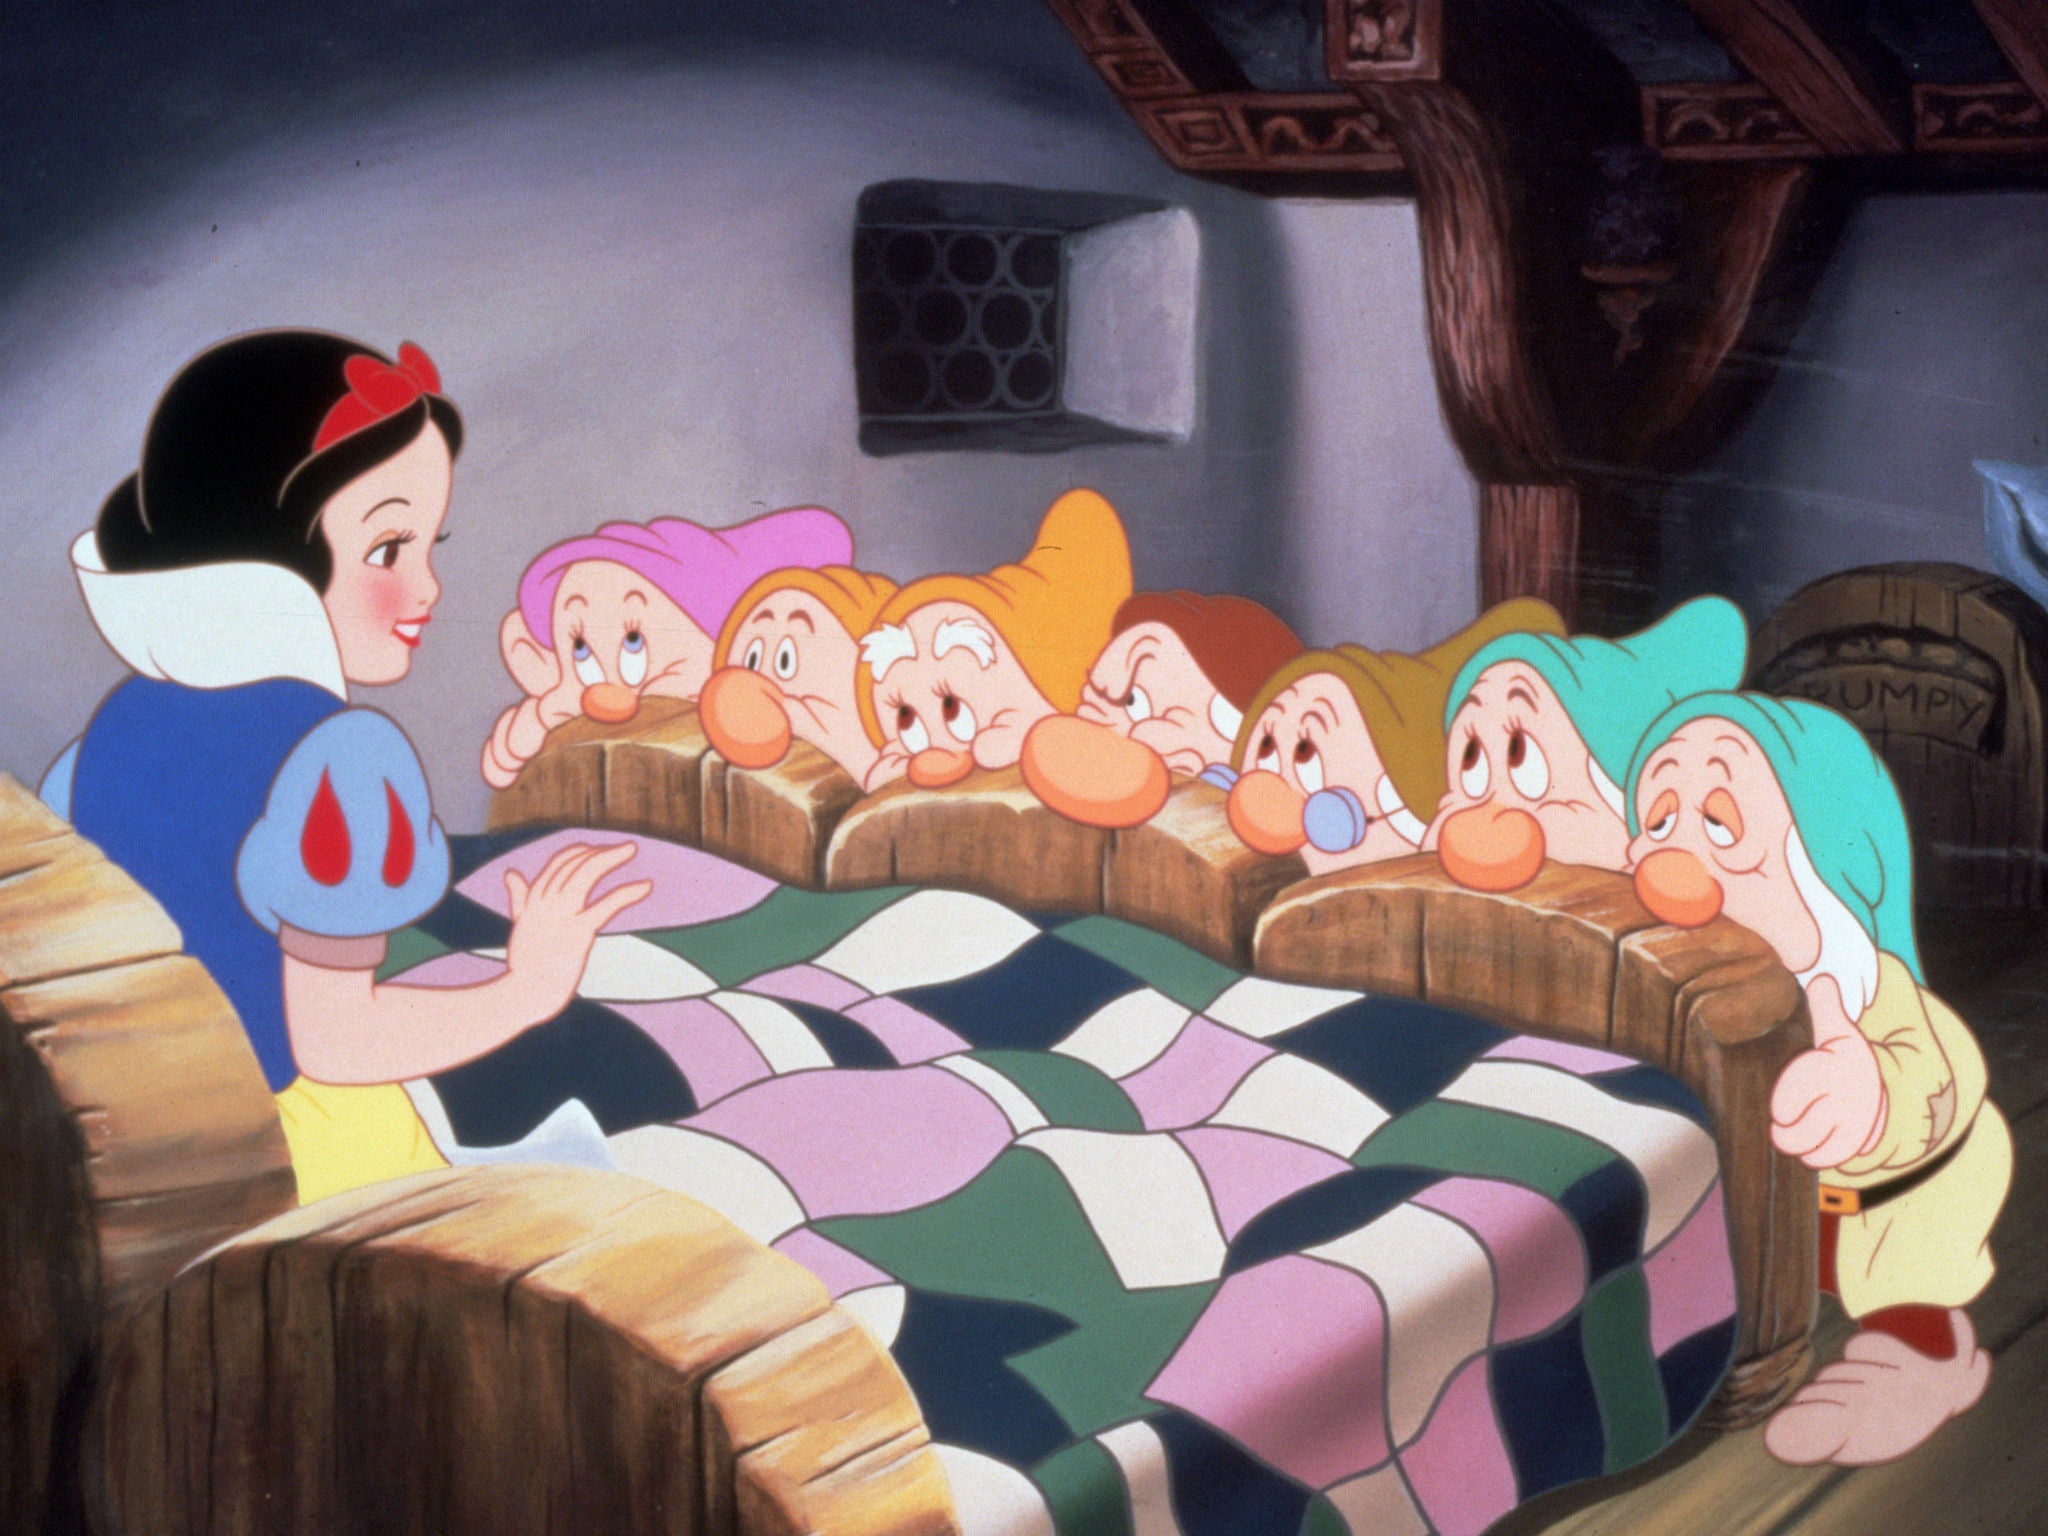 Snow White and the Seven Dwarves was adapted for a hit Disney film in 1937